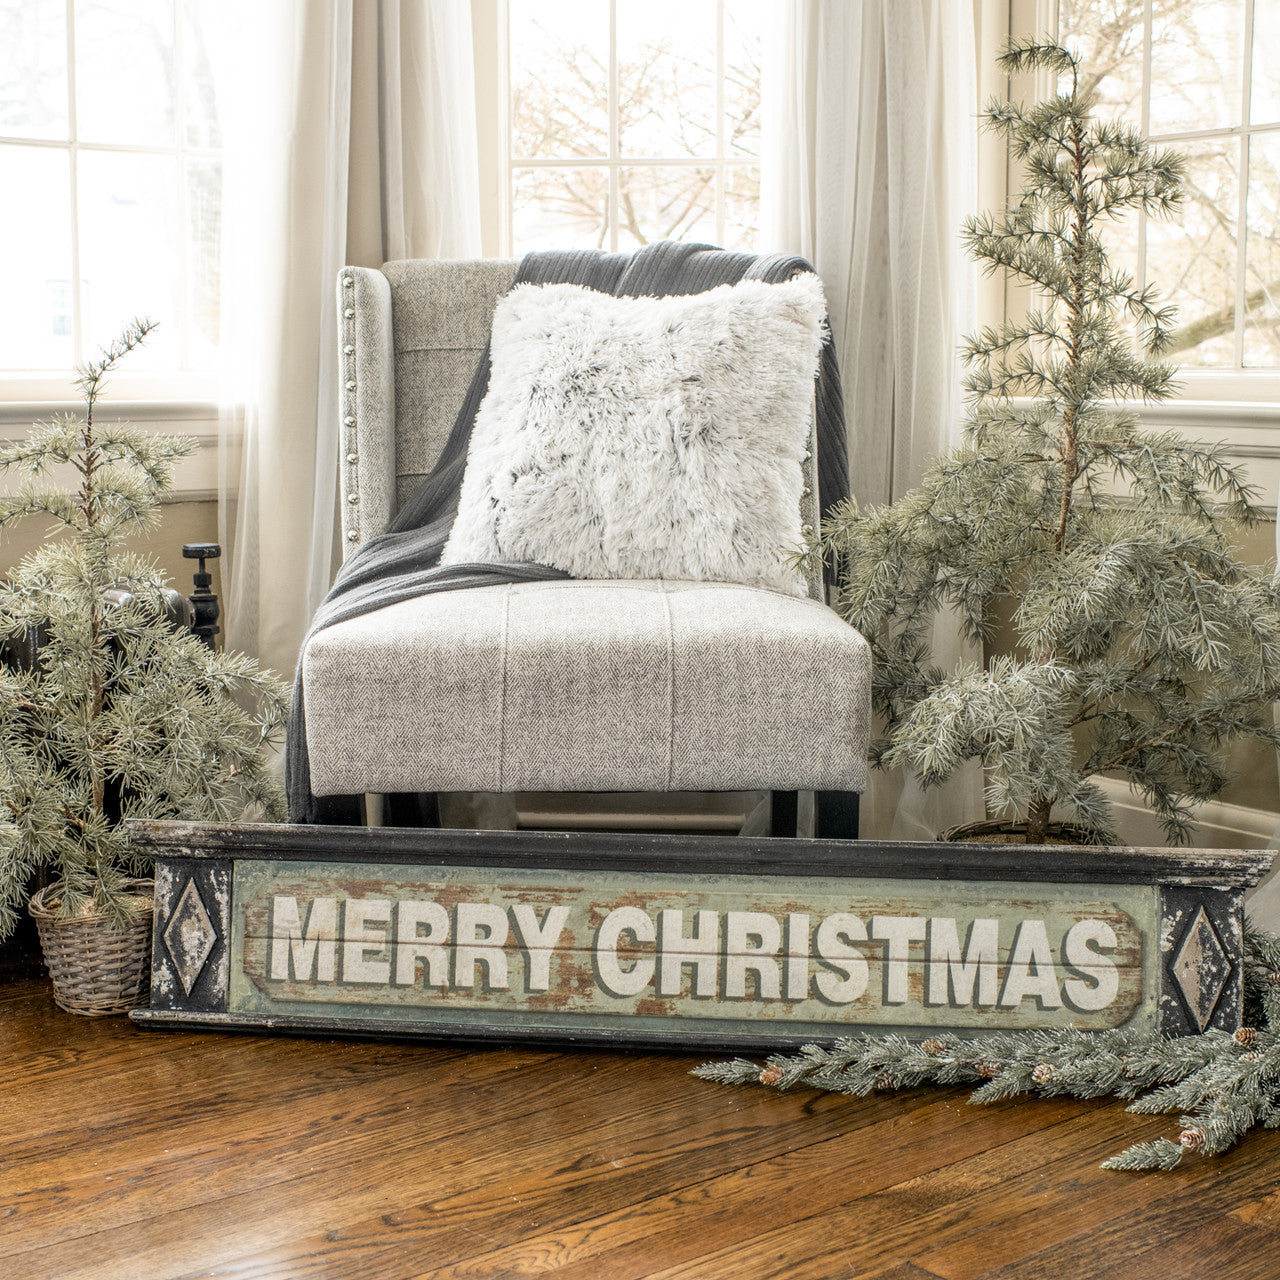 Green Merry Christmas Sign